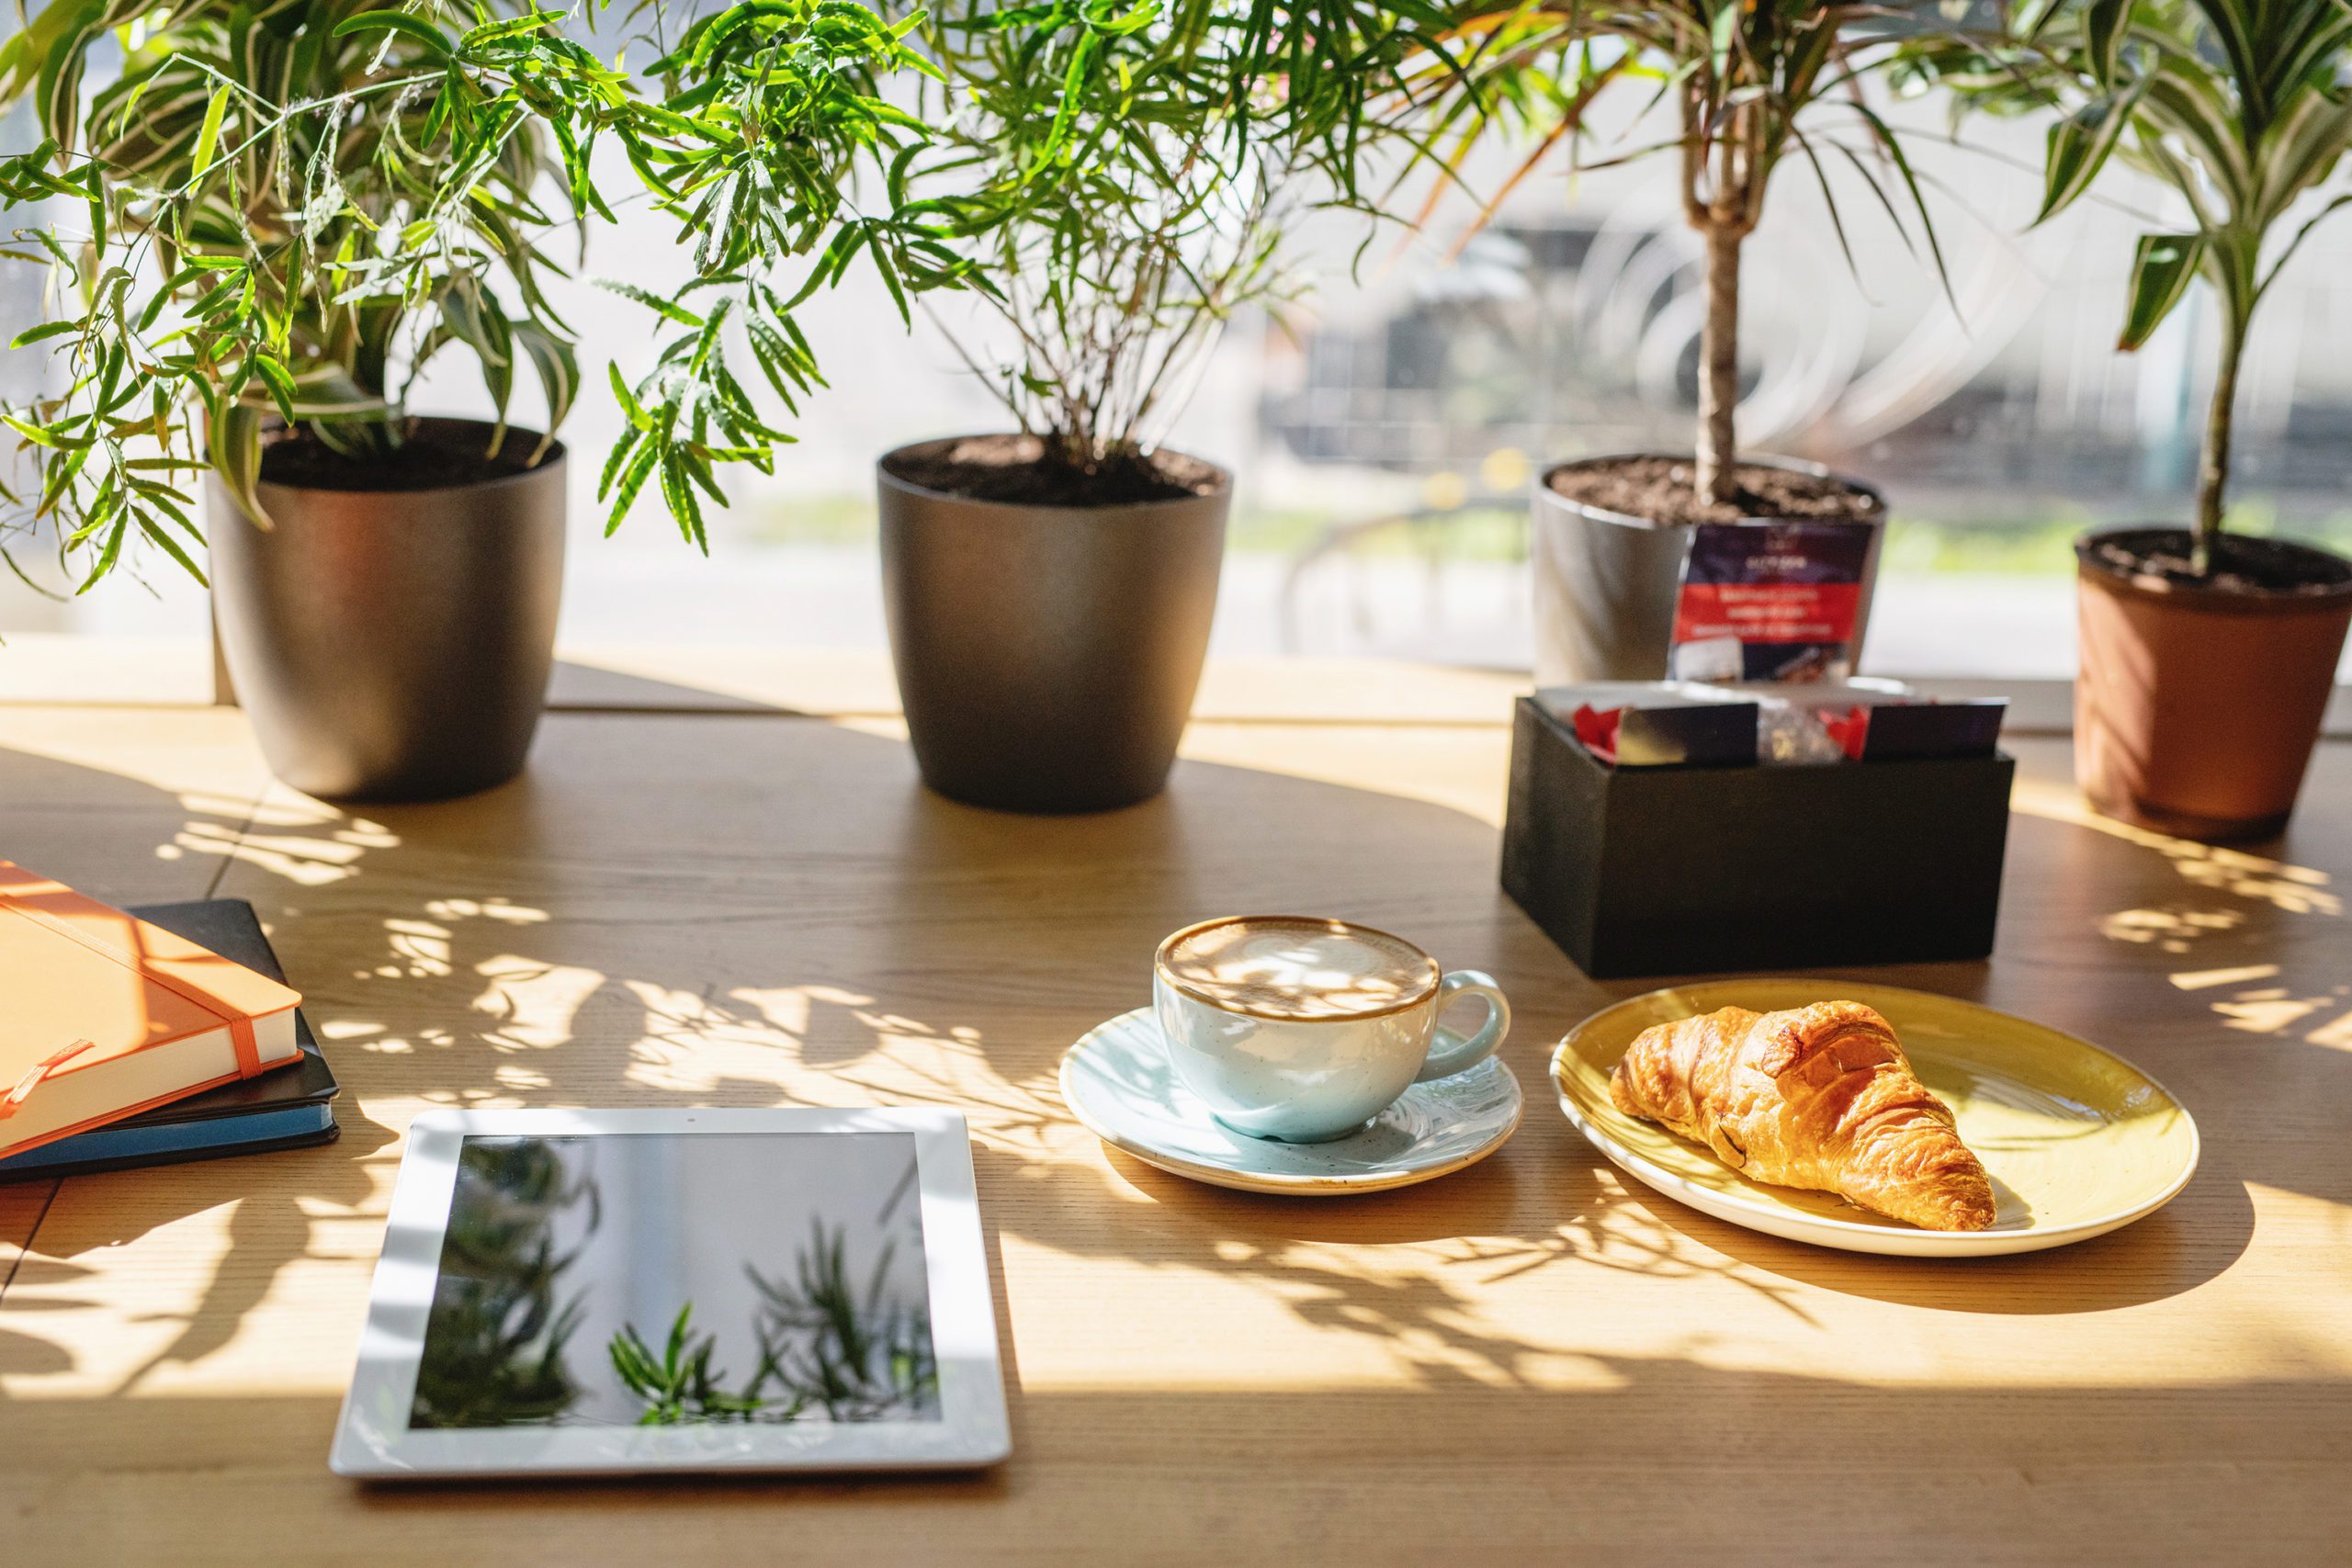 A sun soaked cafe with potted plants behind an ipad, coffee, pastry and more work supplies